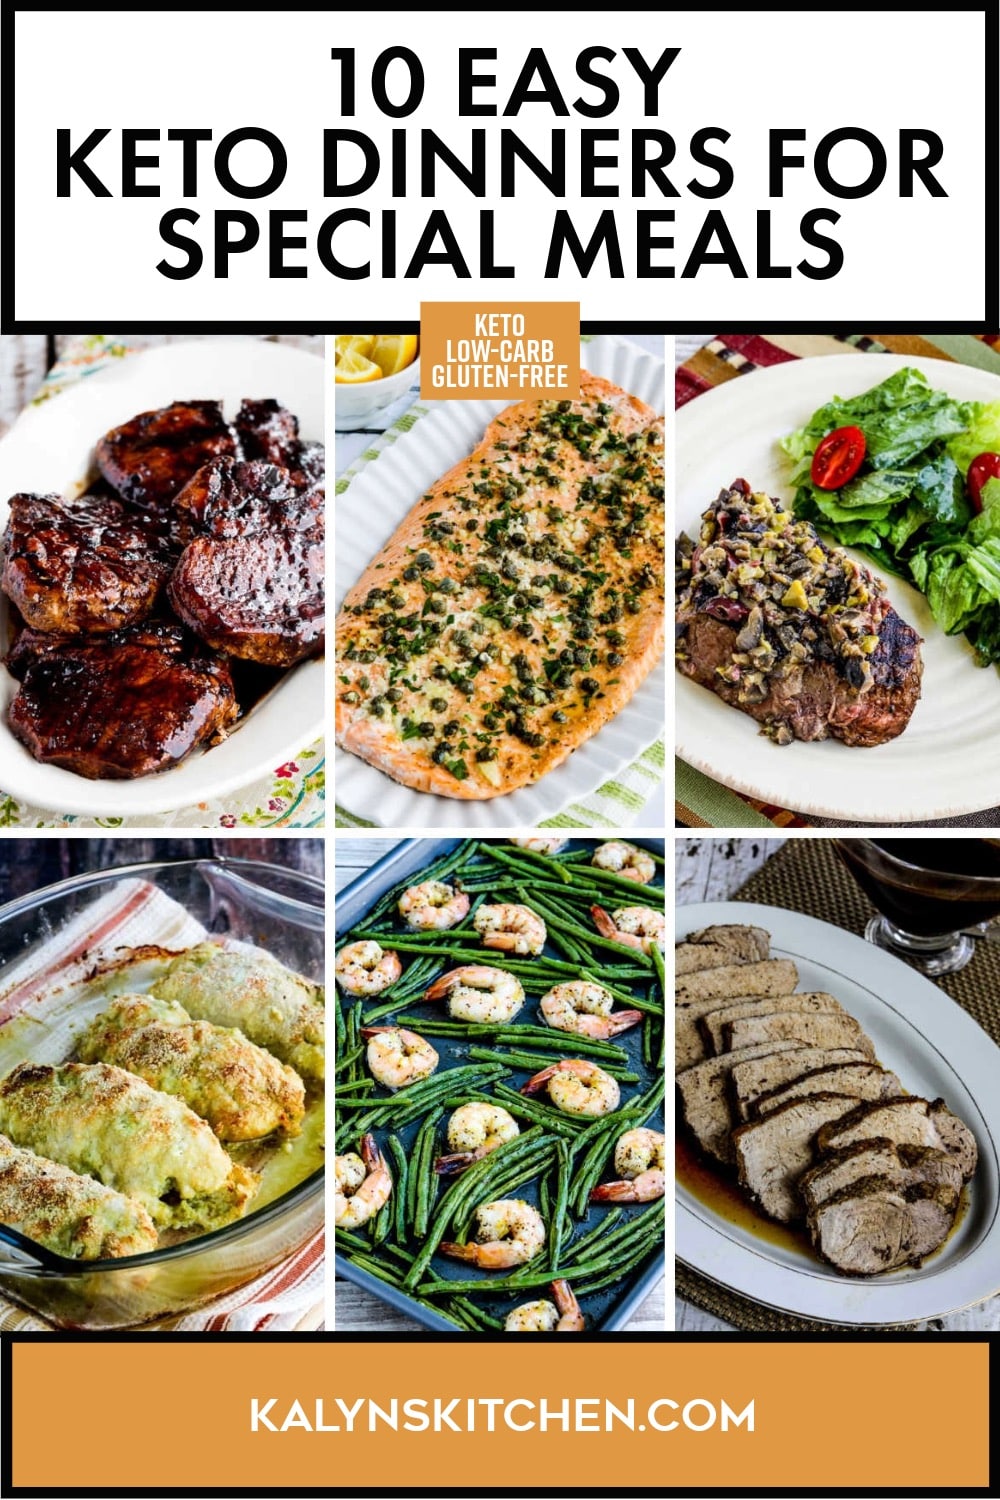 Pinterest image of 10 Easy Keto Dinners for Special Meals